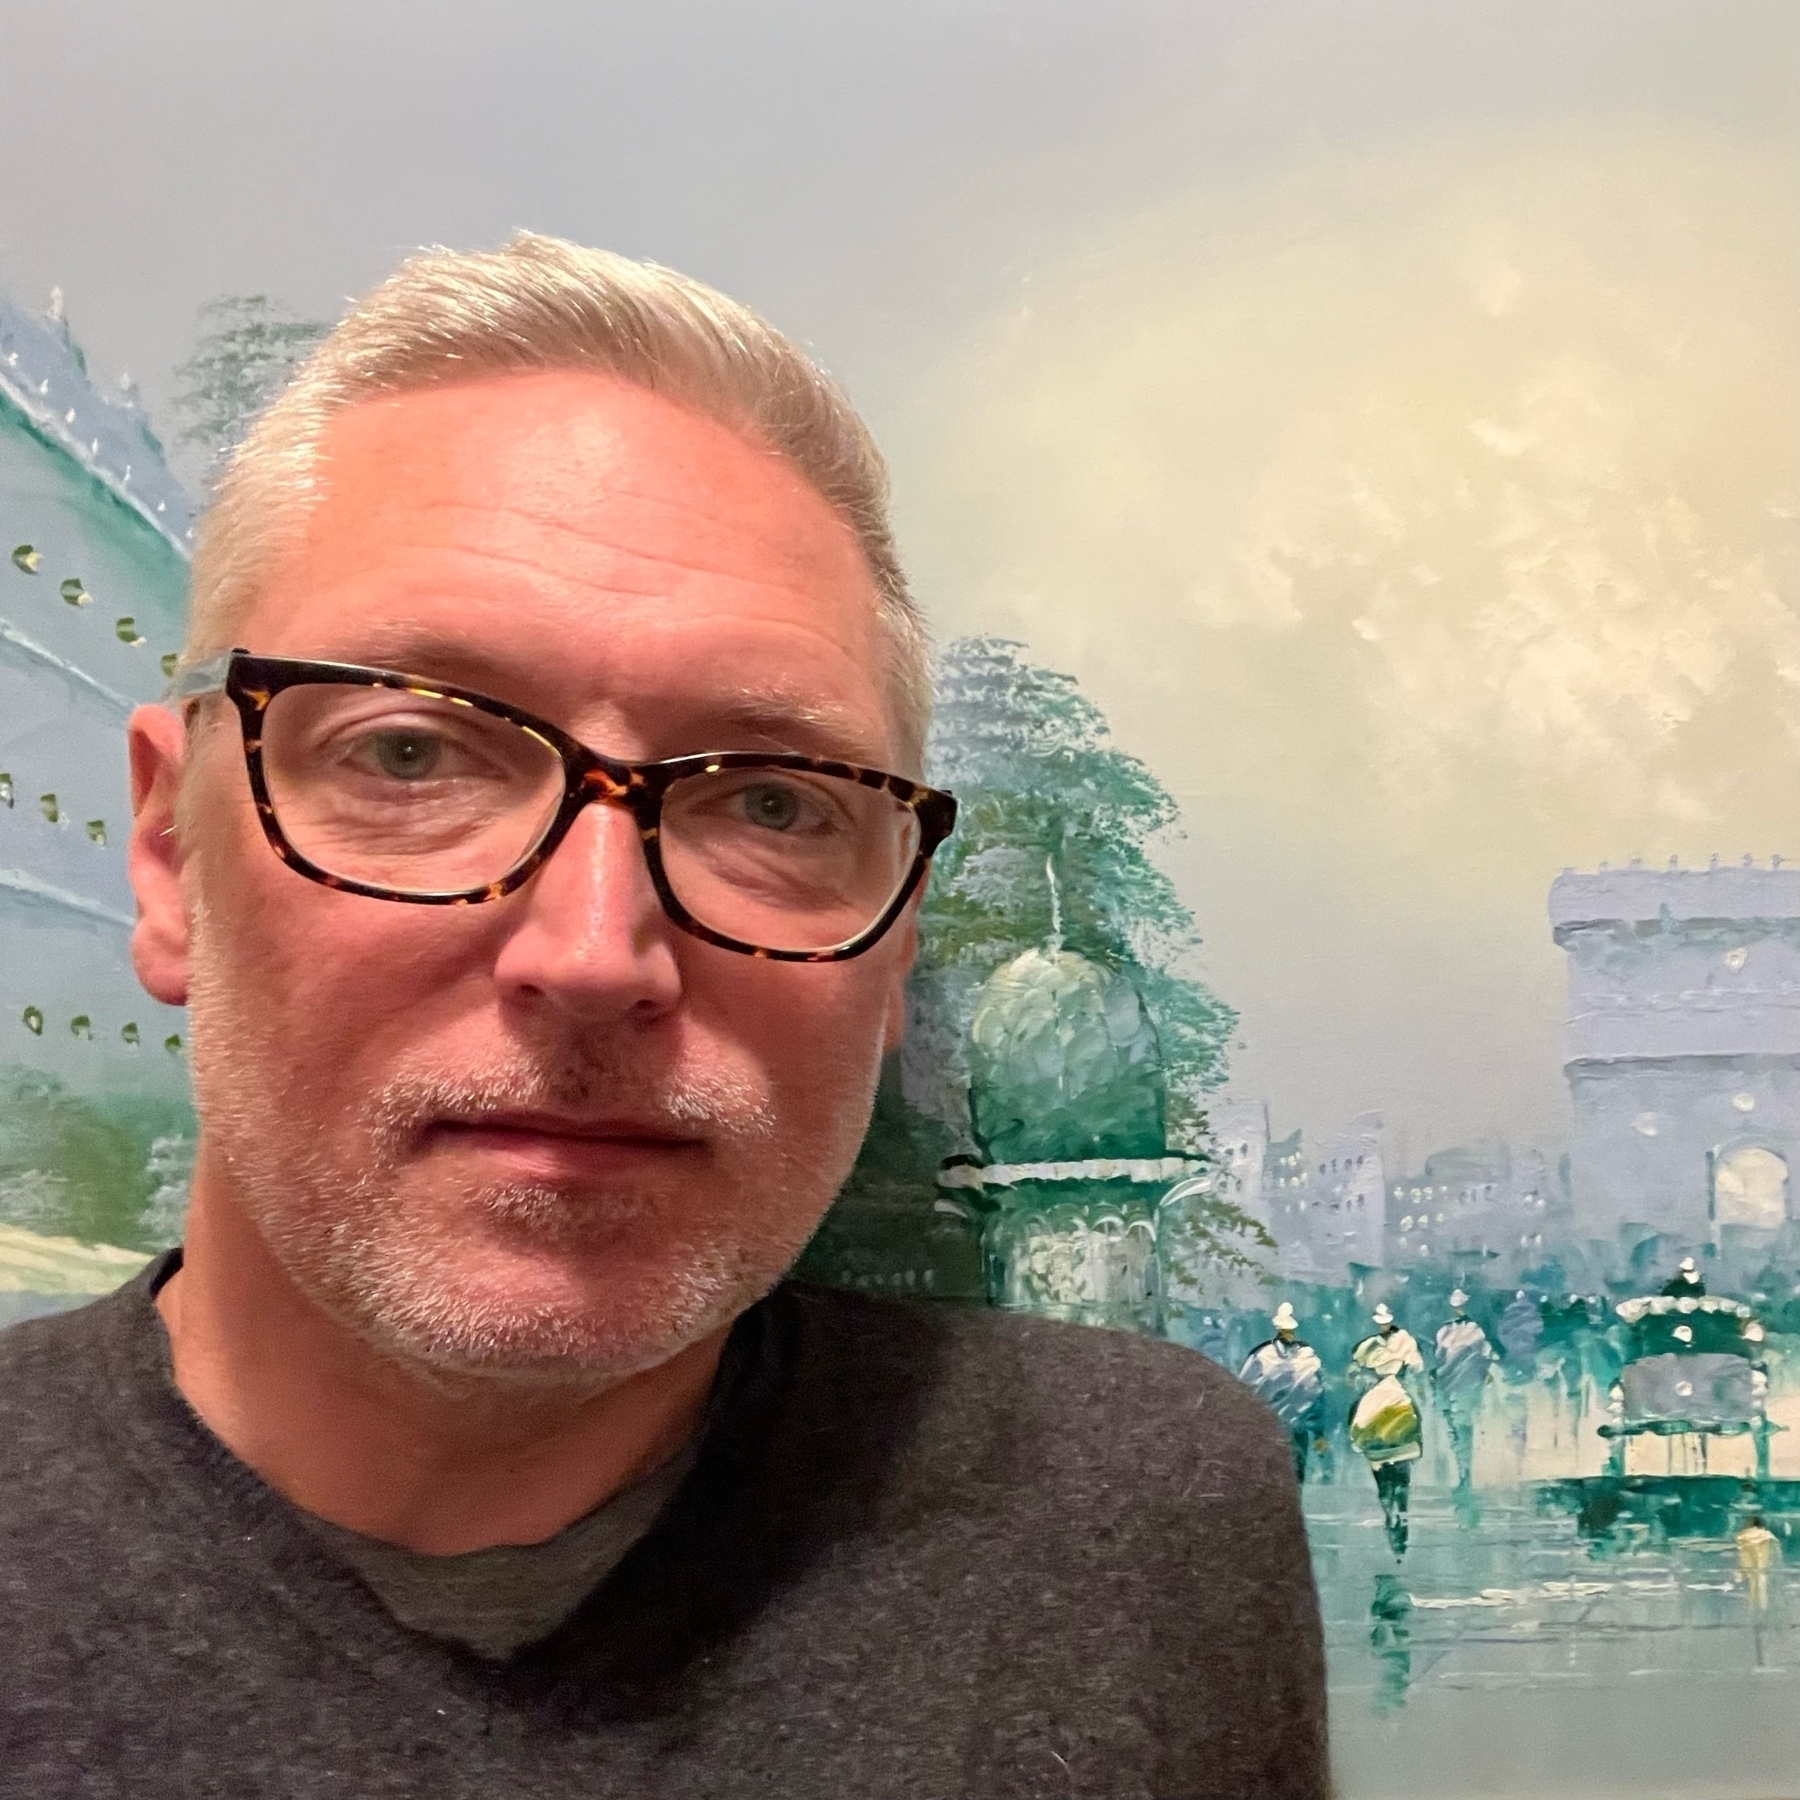 selfie against a painting of Paris - maybe Champs Elysses? -  impressionist dtule with lots of blues and greens